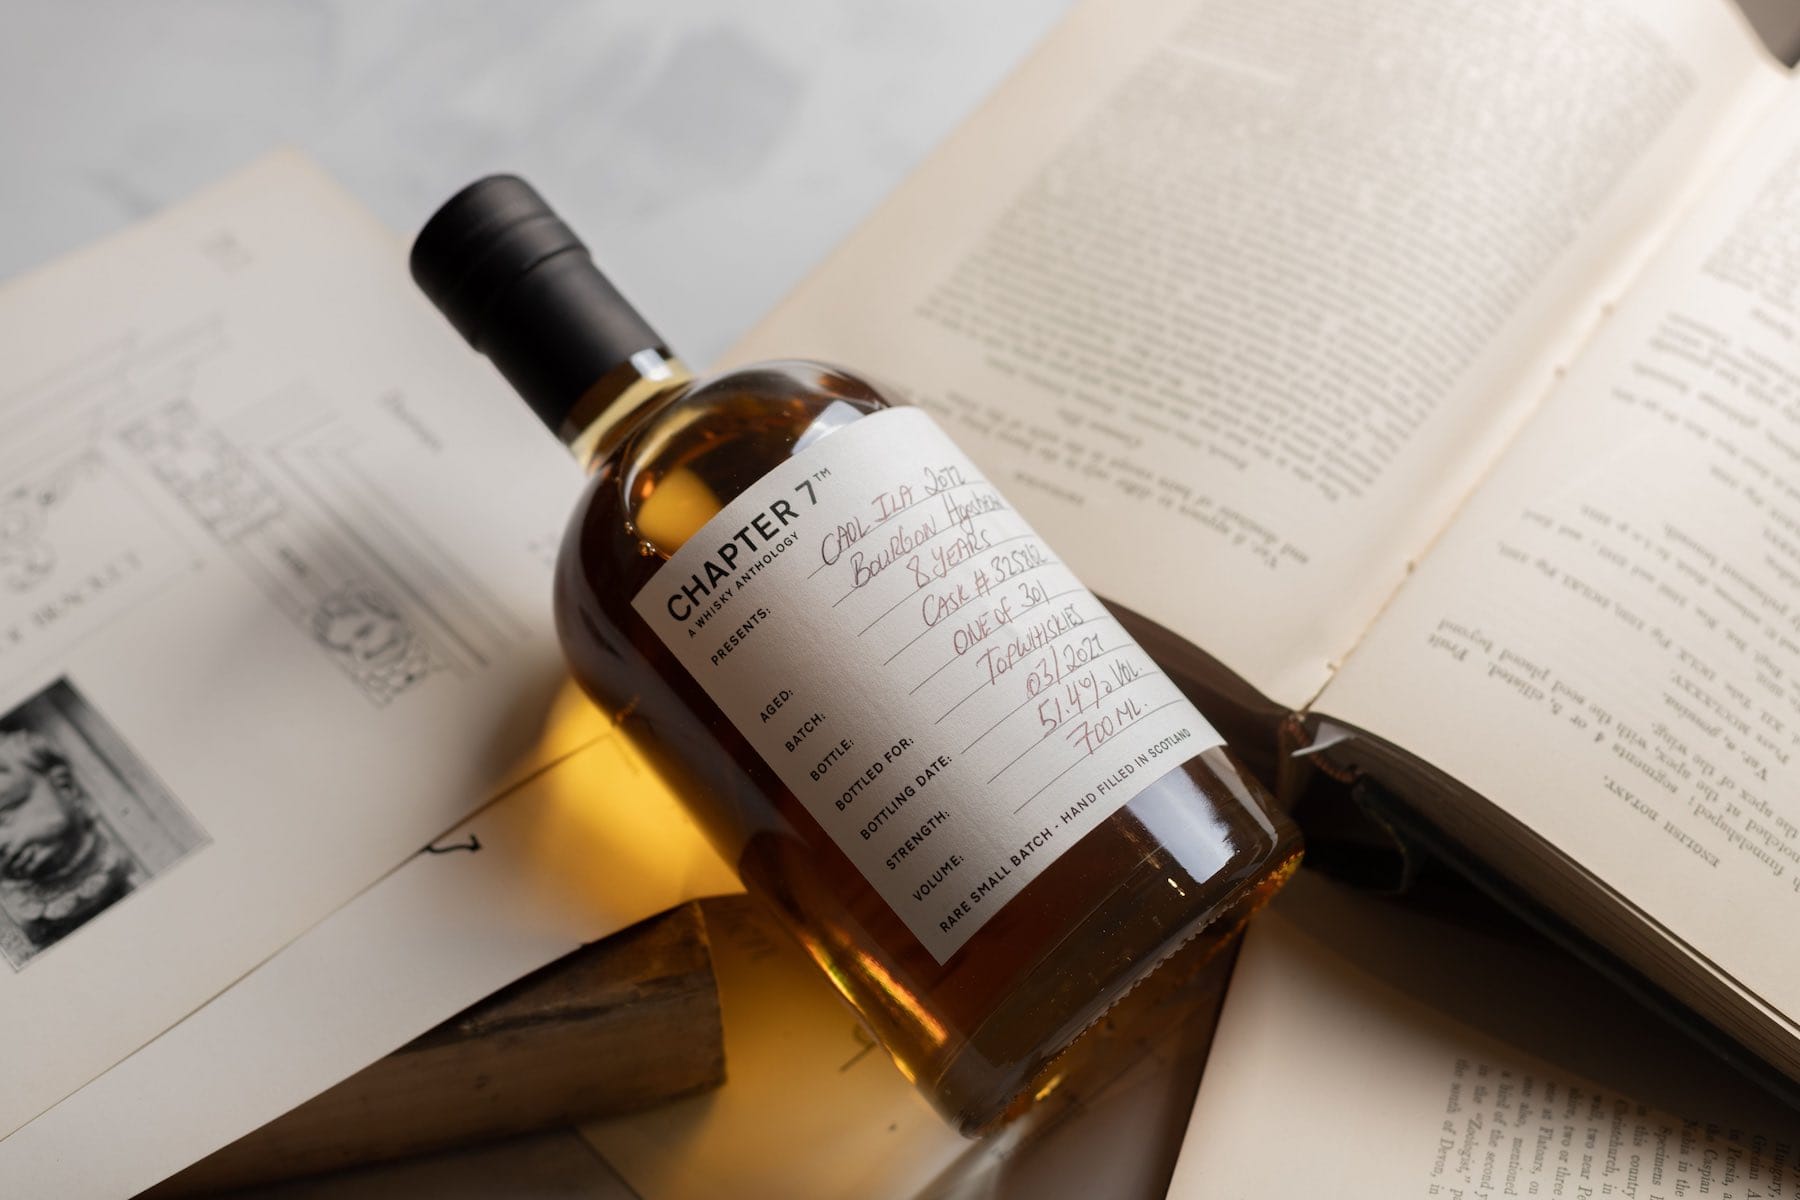 Chapter 7 x TopWhiskies Collab, 8 Year Old Caol Ila, Tasting Notes